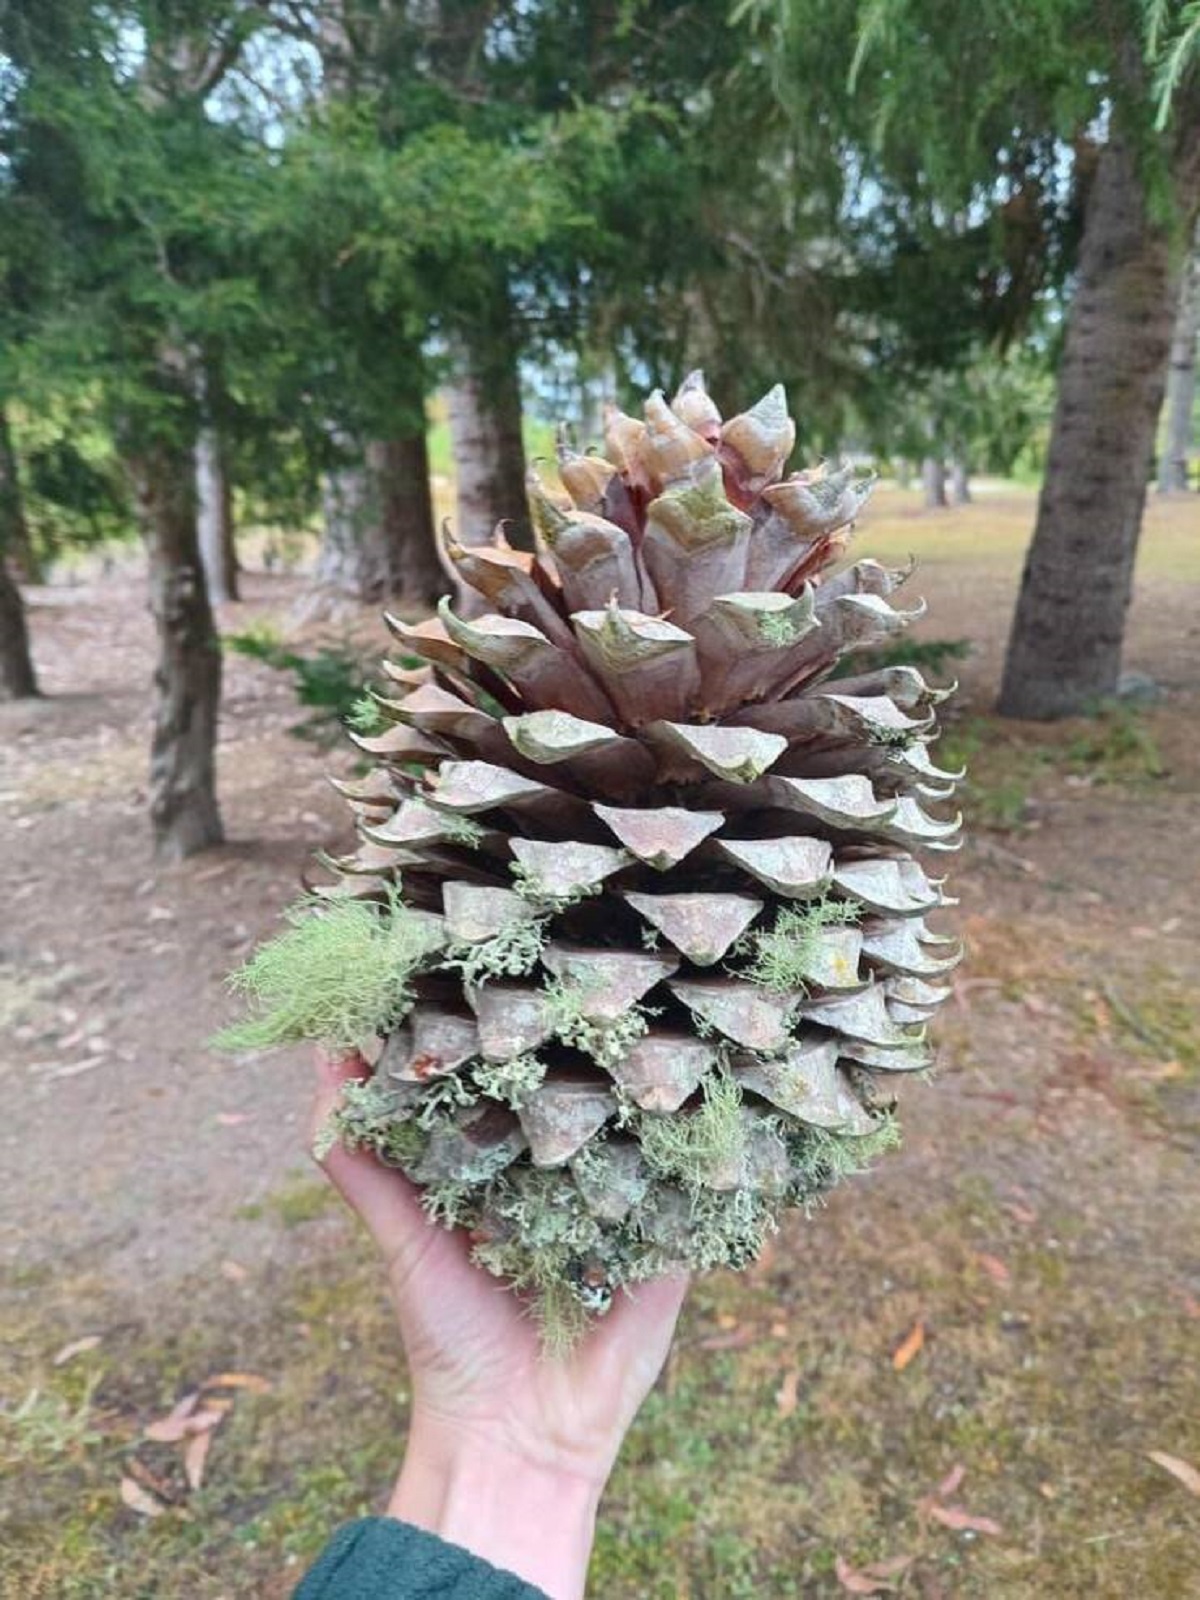 Pine cones, my friend...pine cones can be really, really big: